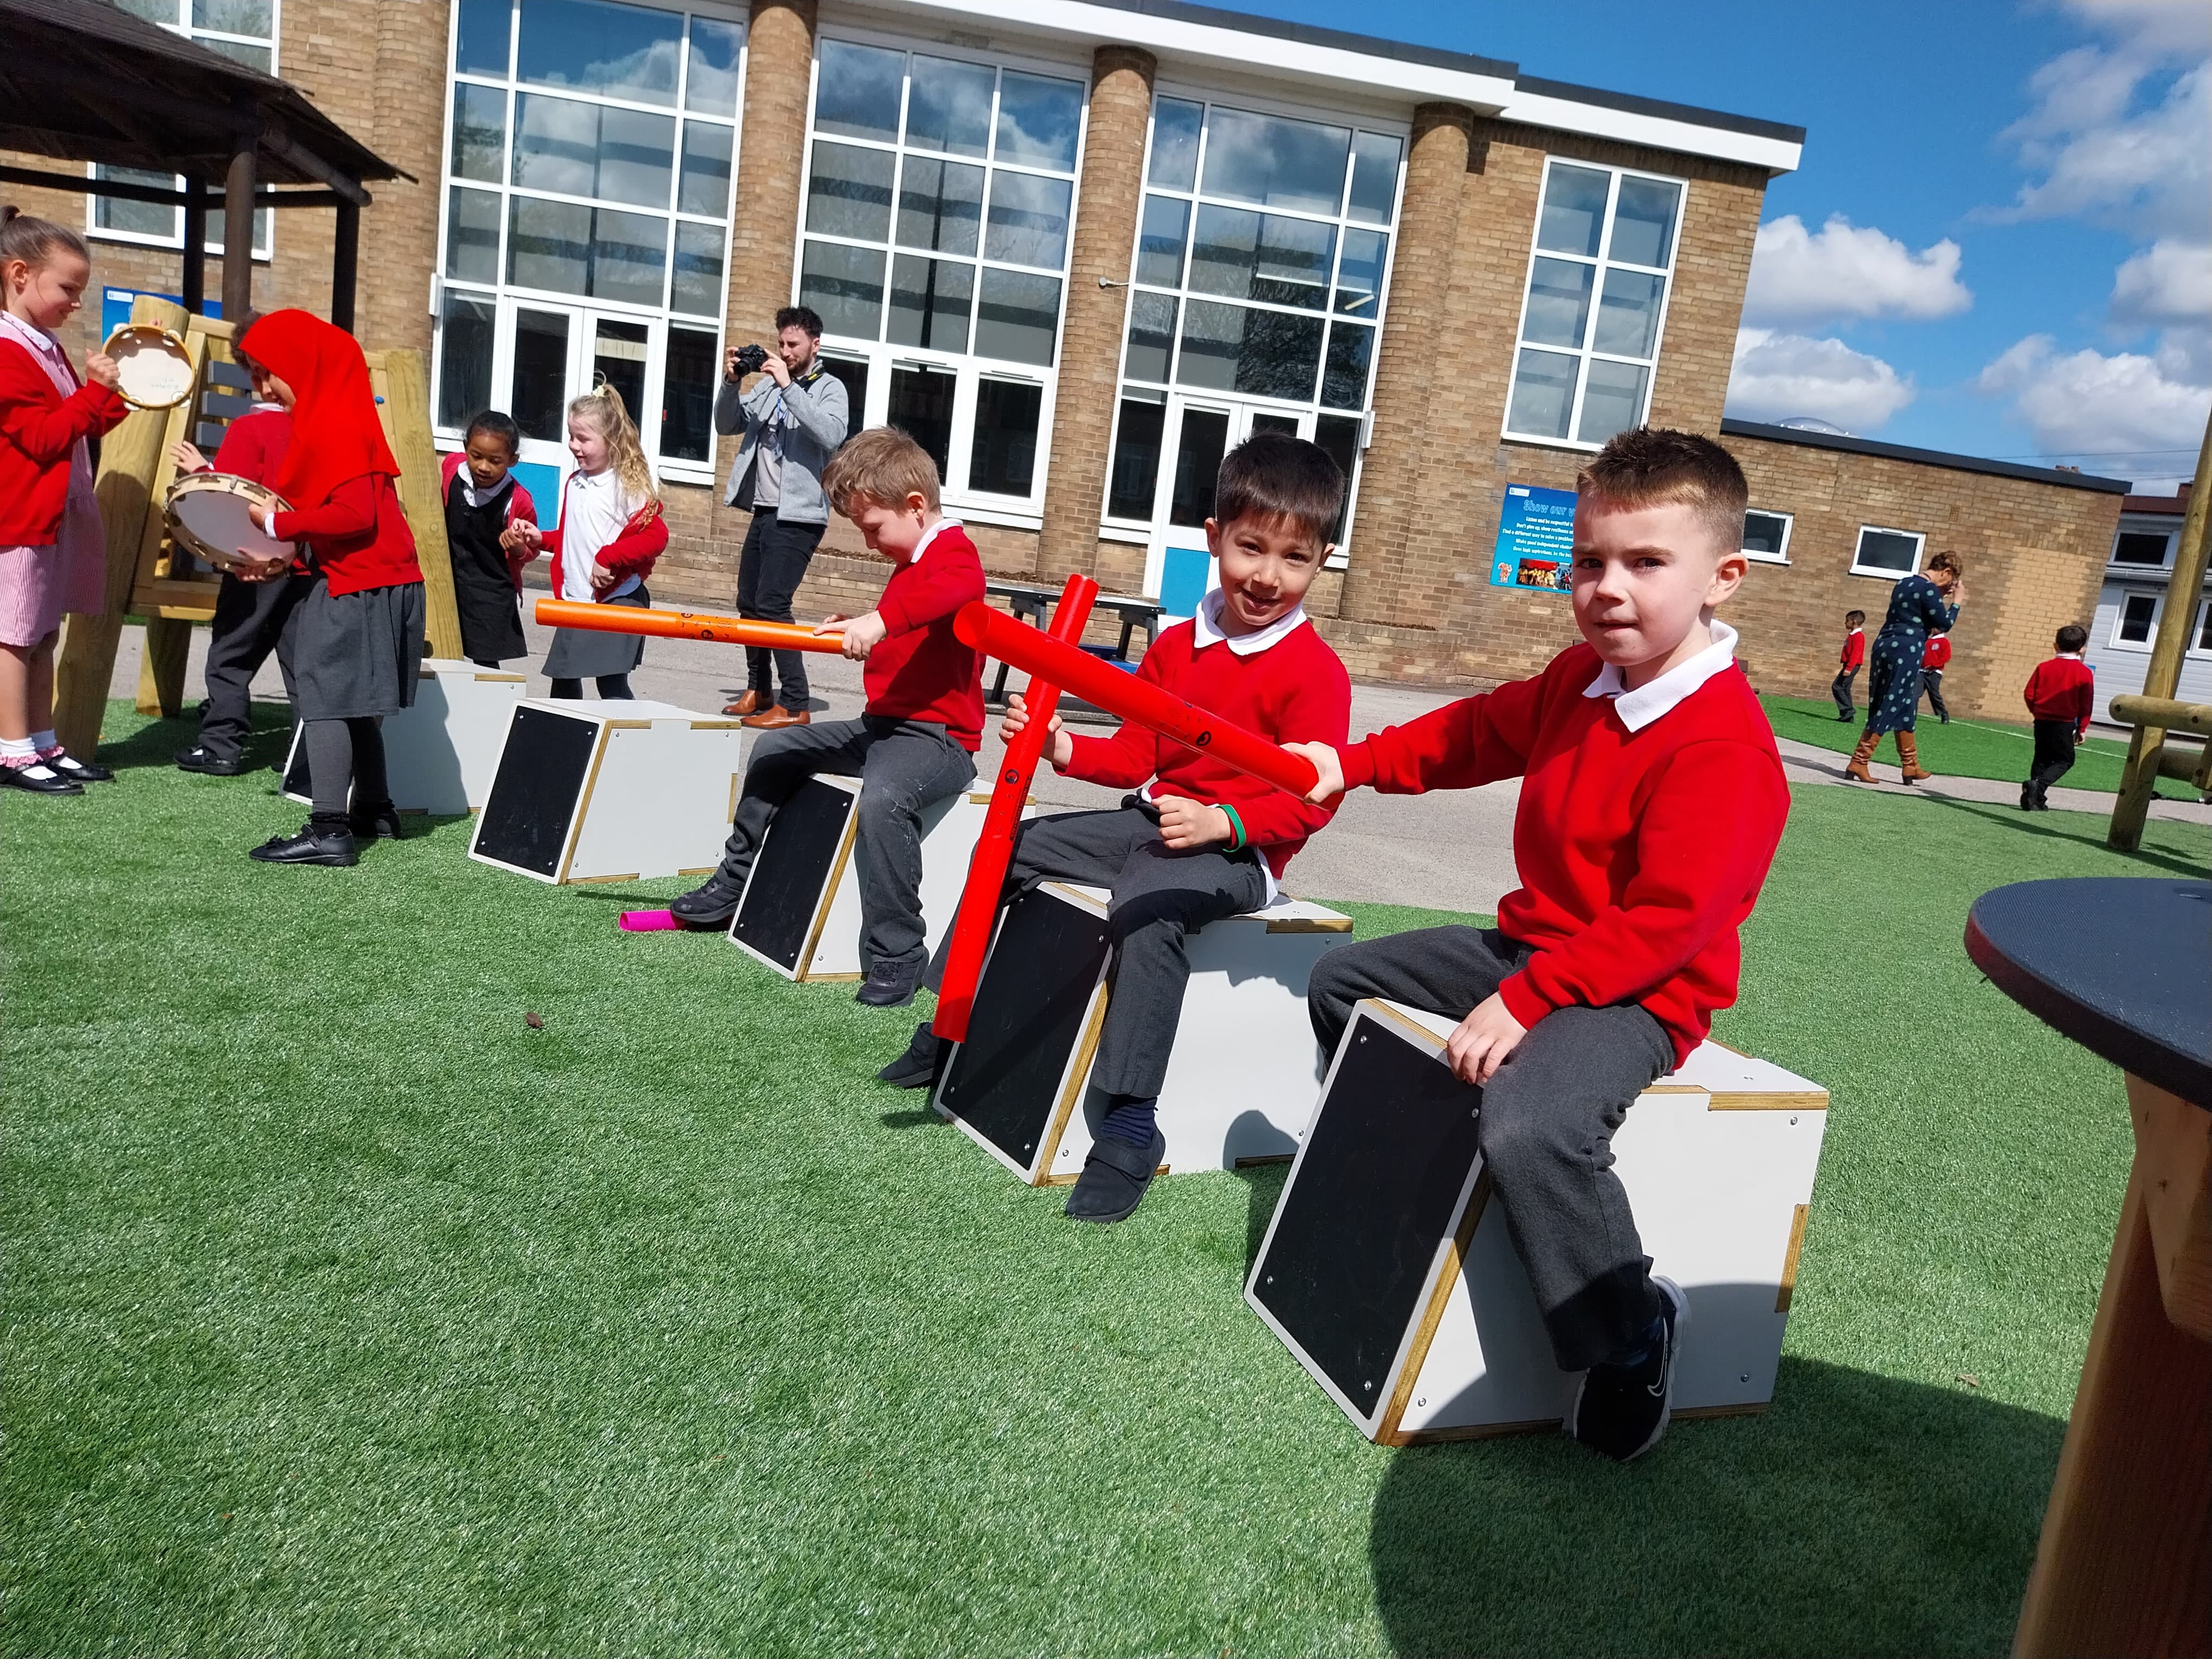 8 children wearing red school uniforms are playing with Pentagon Play's outdoor musical instruments, including drum seats, a music easel and tambourines. All the children look happy and excited to be playing with the equpment. 